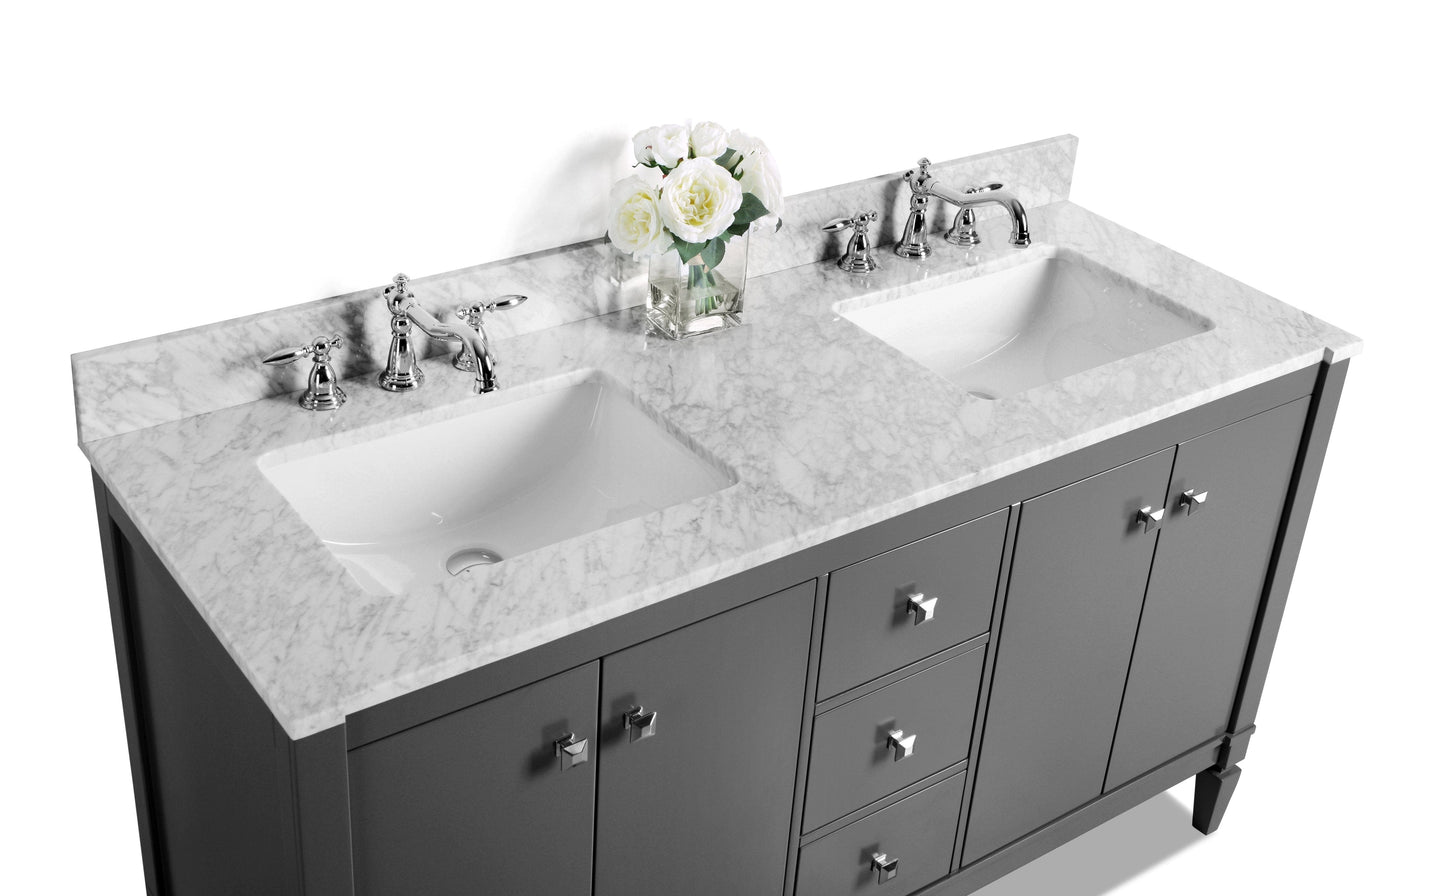 Ancerra Designs Kayleigh 60 in. Bath Vanity Set in Sapphire Gray with 24 in. Mirror